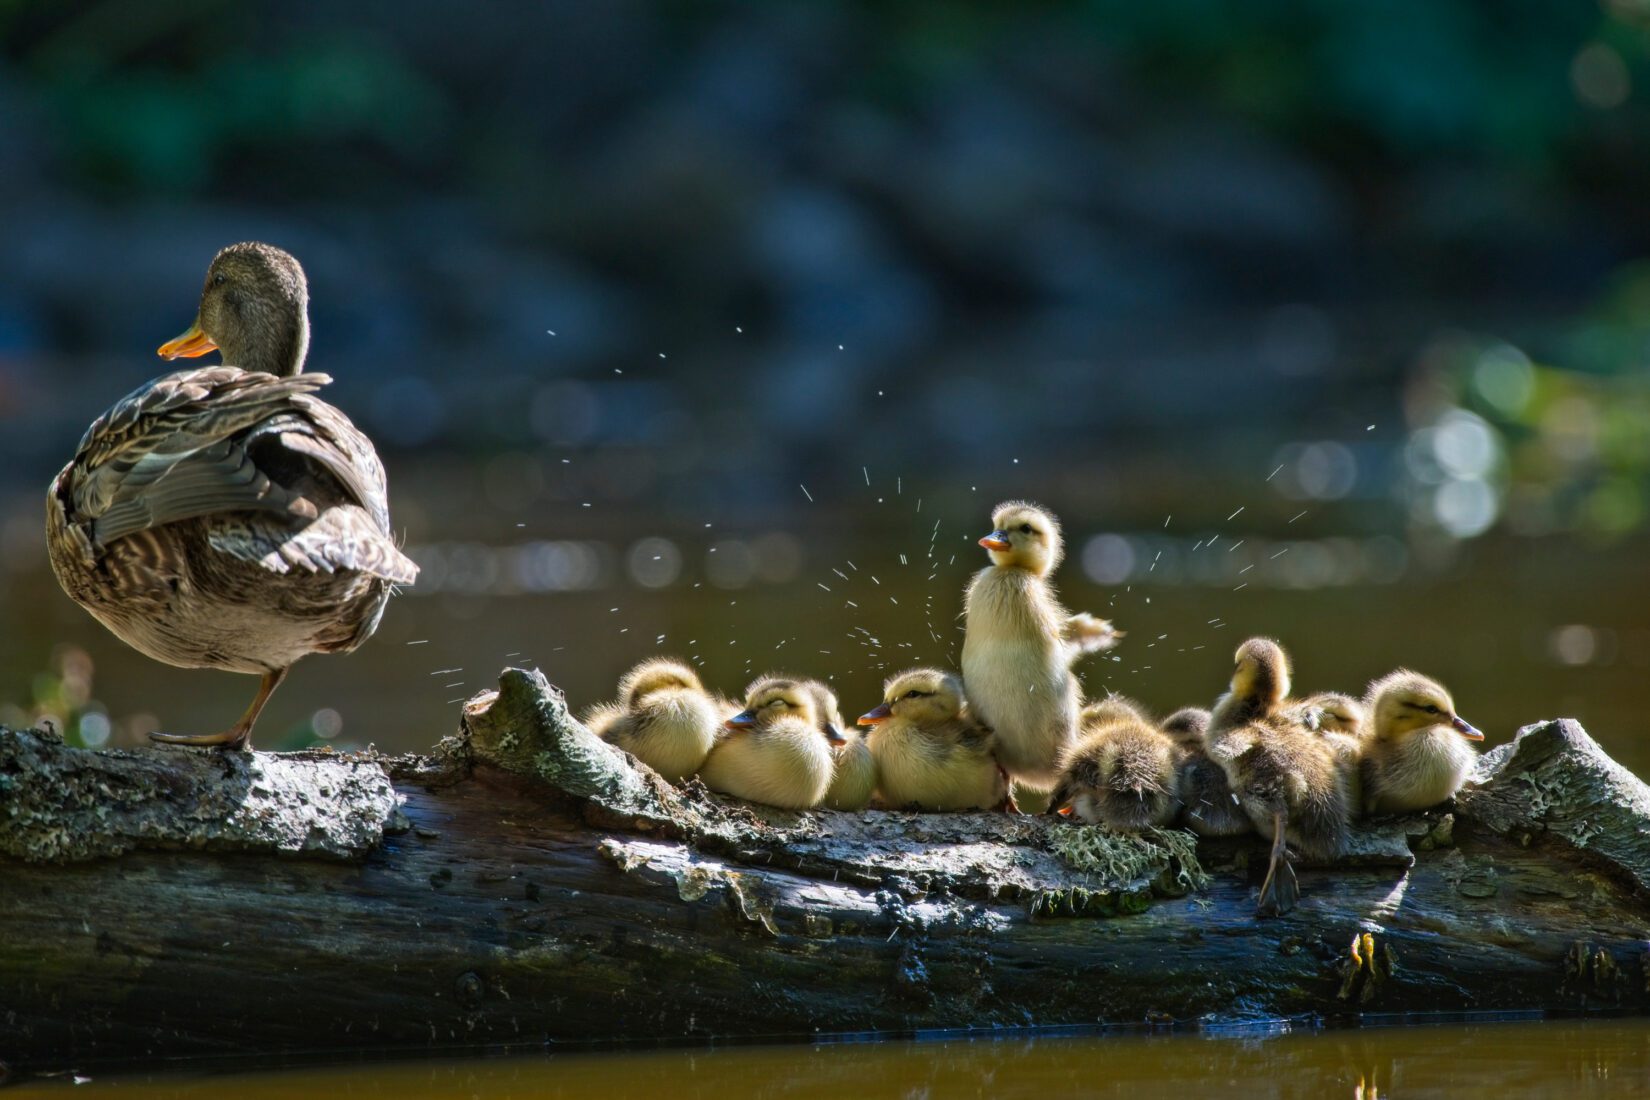 Mallard duck and ducklings in a line on a log - one duckling shaking water off